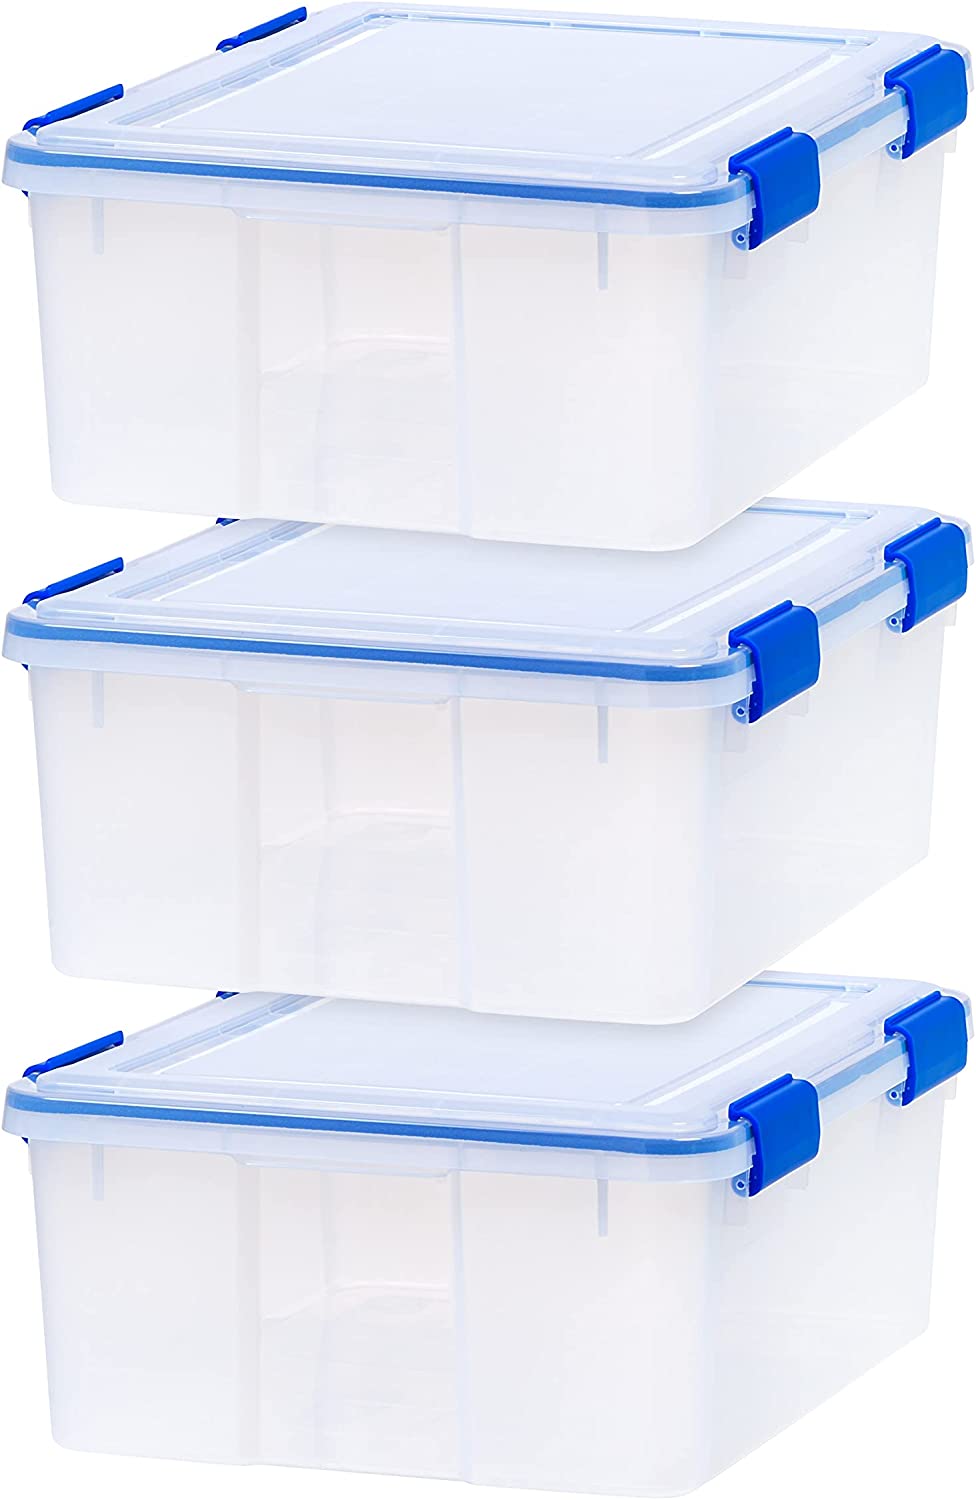 https://bigbigmart.com/wp-content/uploads/2023/06/IRIS-USA-30-Quart-WEATHERPRO-Plastic-Storage-Box-with-Durable-Lid-and-Seal-and-Secure-Latching-Buckles-Clear-With-Blue-Buckles-Weathertight-3-Pack.jpg